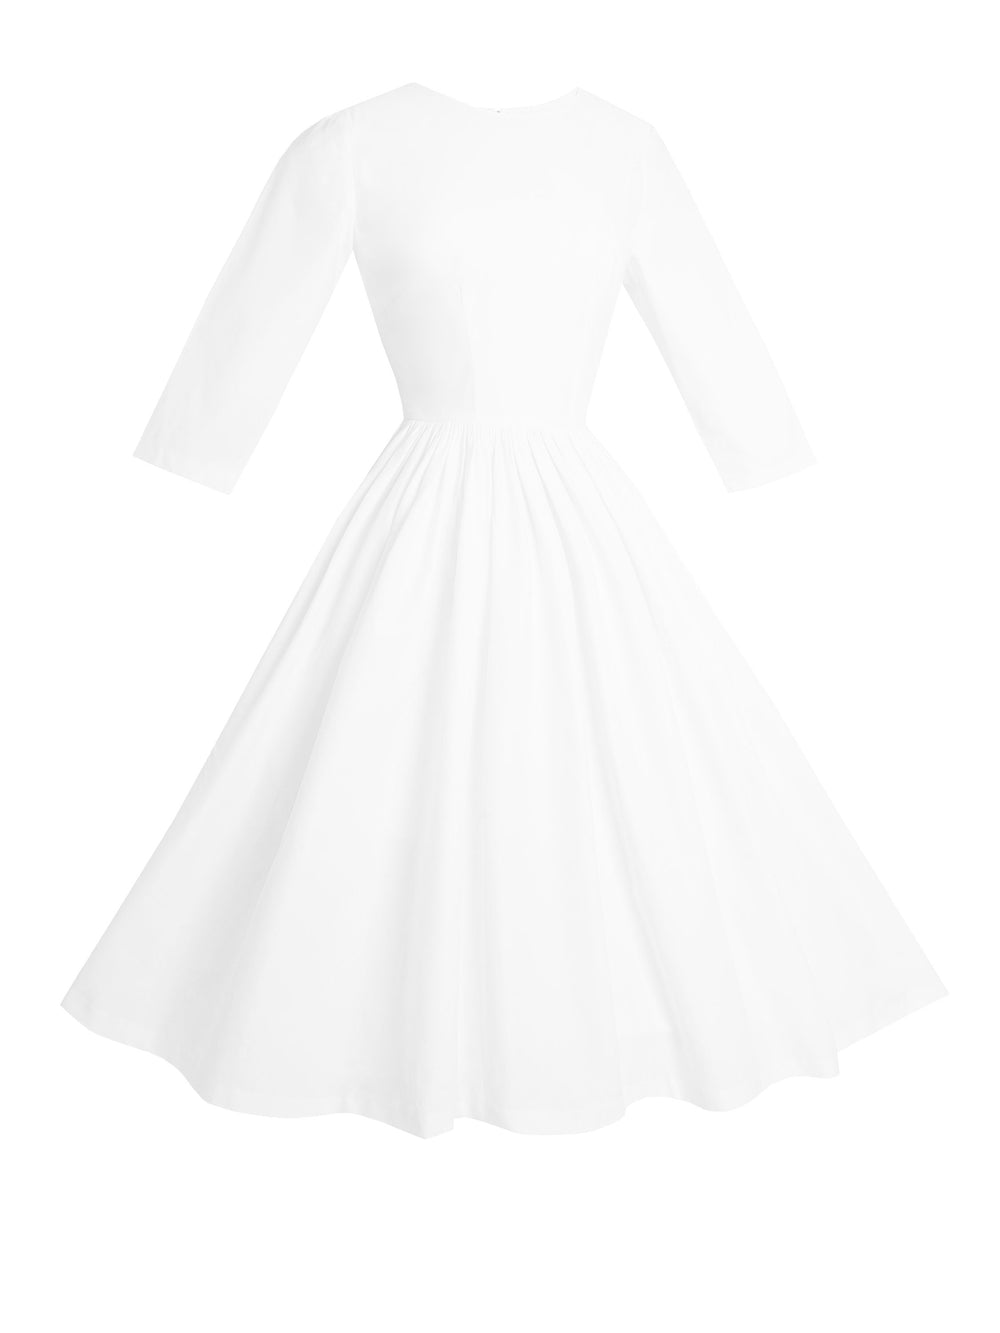 RTS - Size S - Marianne Dress in White Cotton